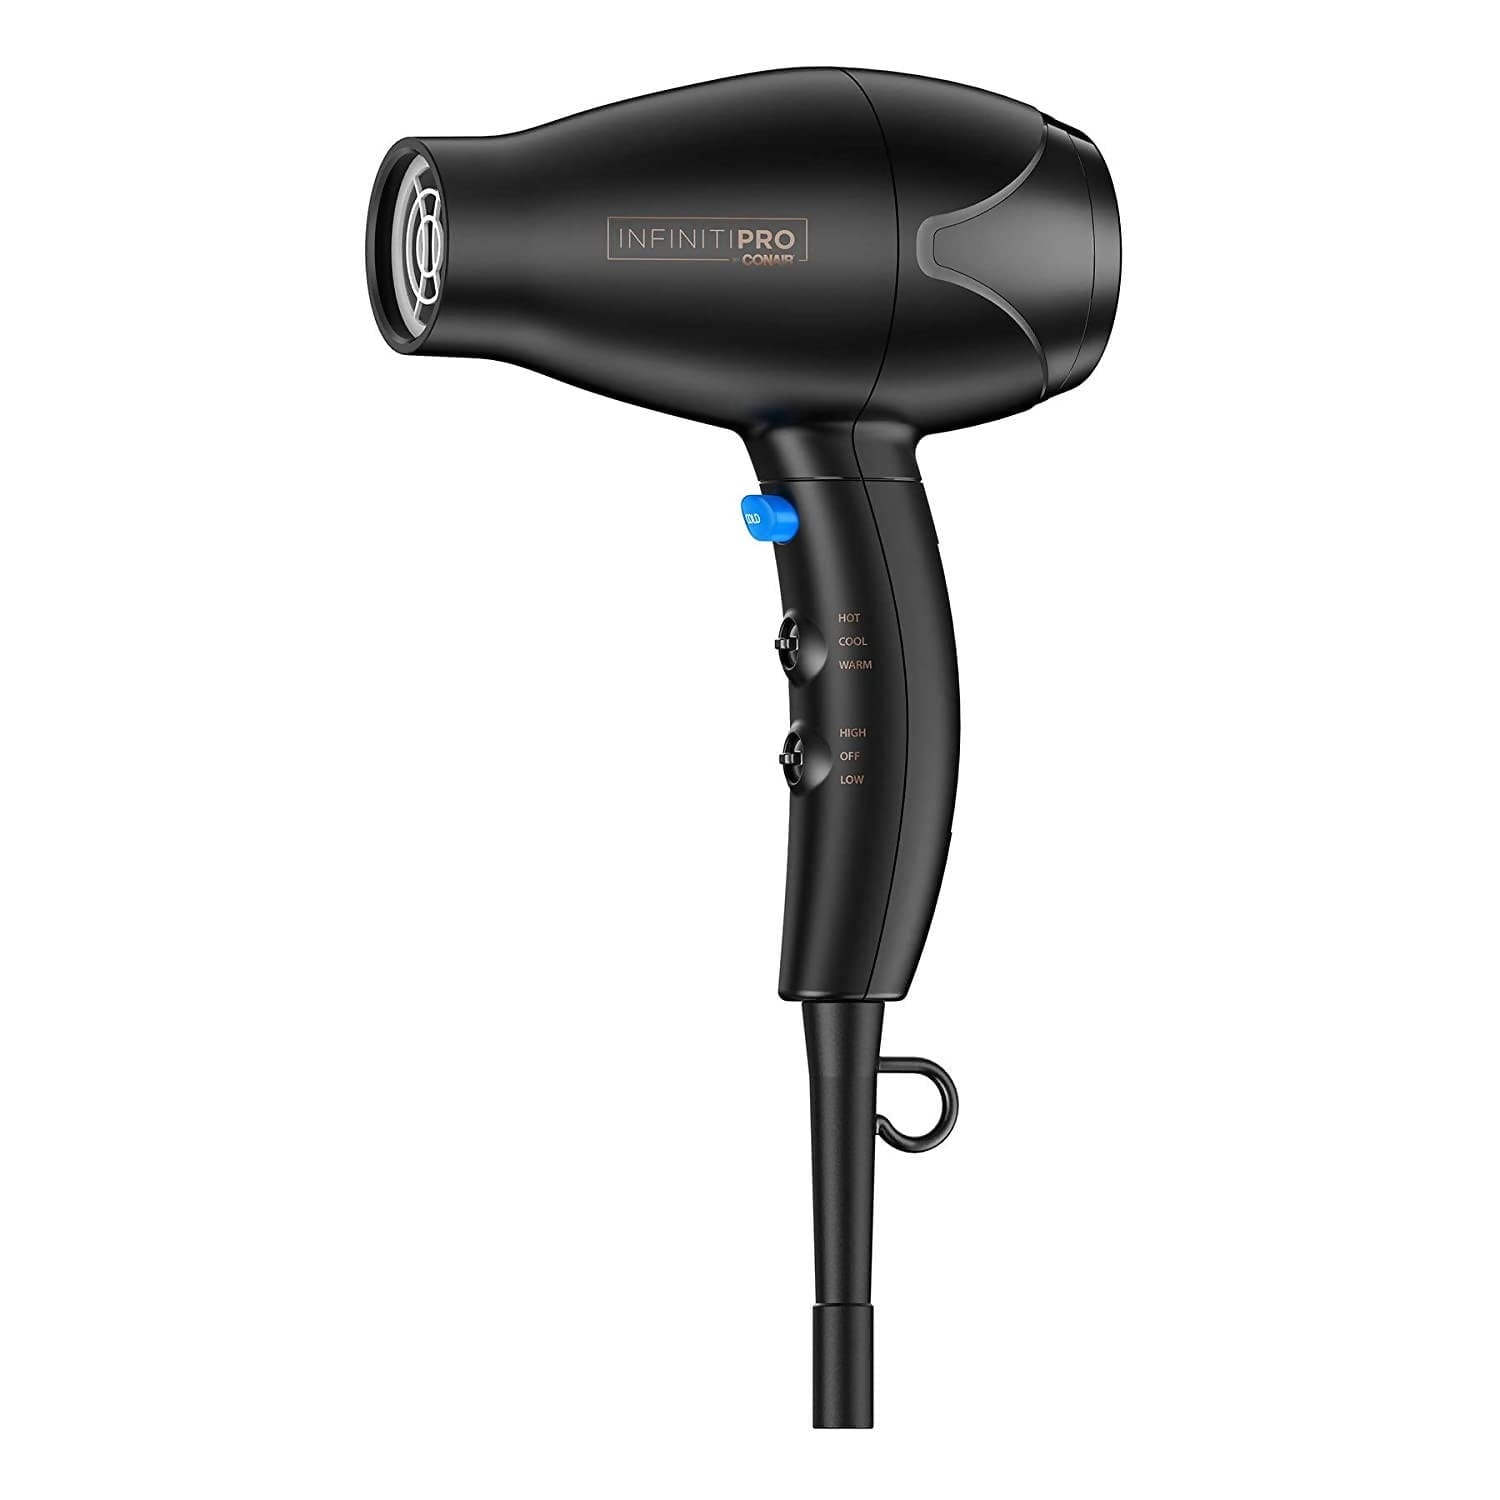 InfinitiPRO By Conair Mighty Mini Compact Lightweight Professional Power Hair Dryer with AC Motor (Black) - C-359